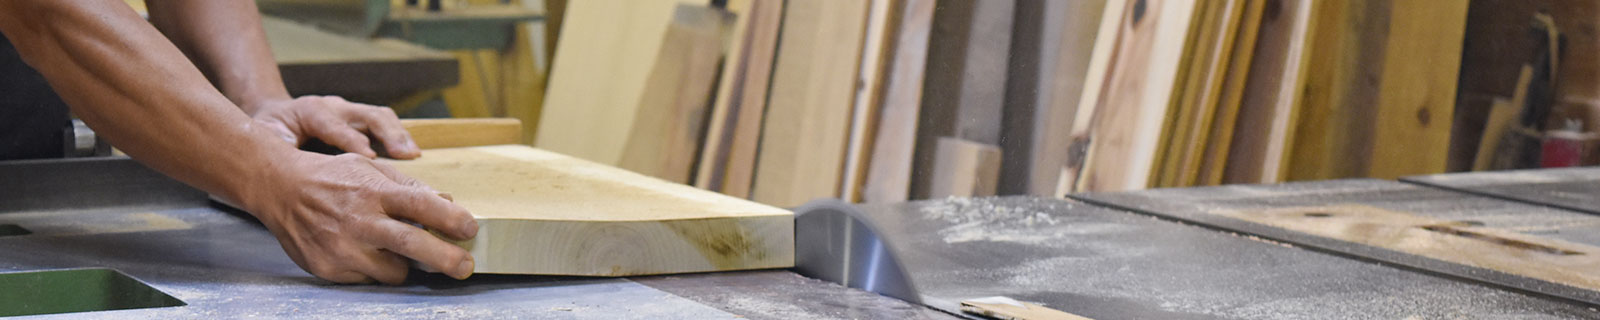 Woodworking products